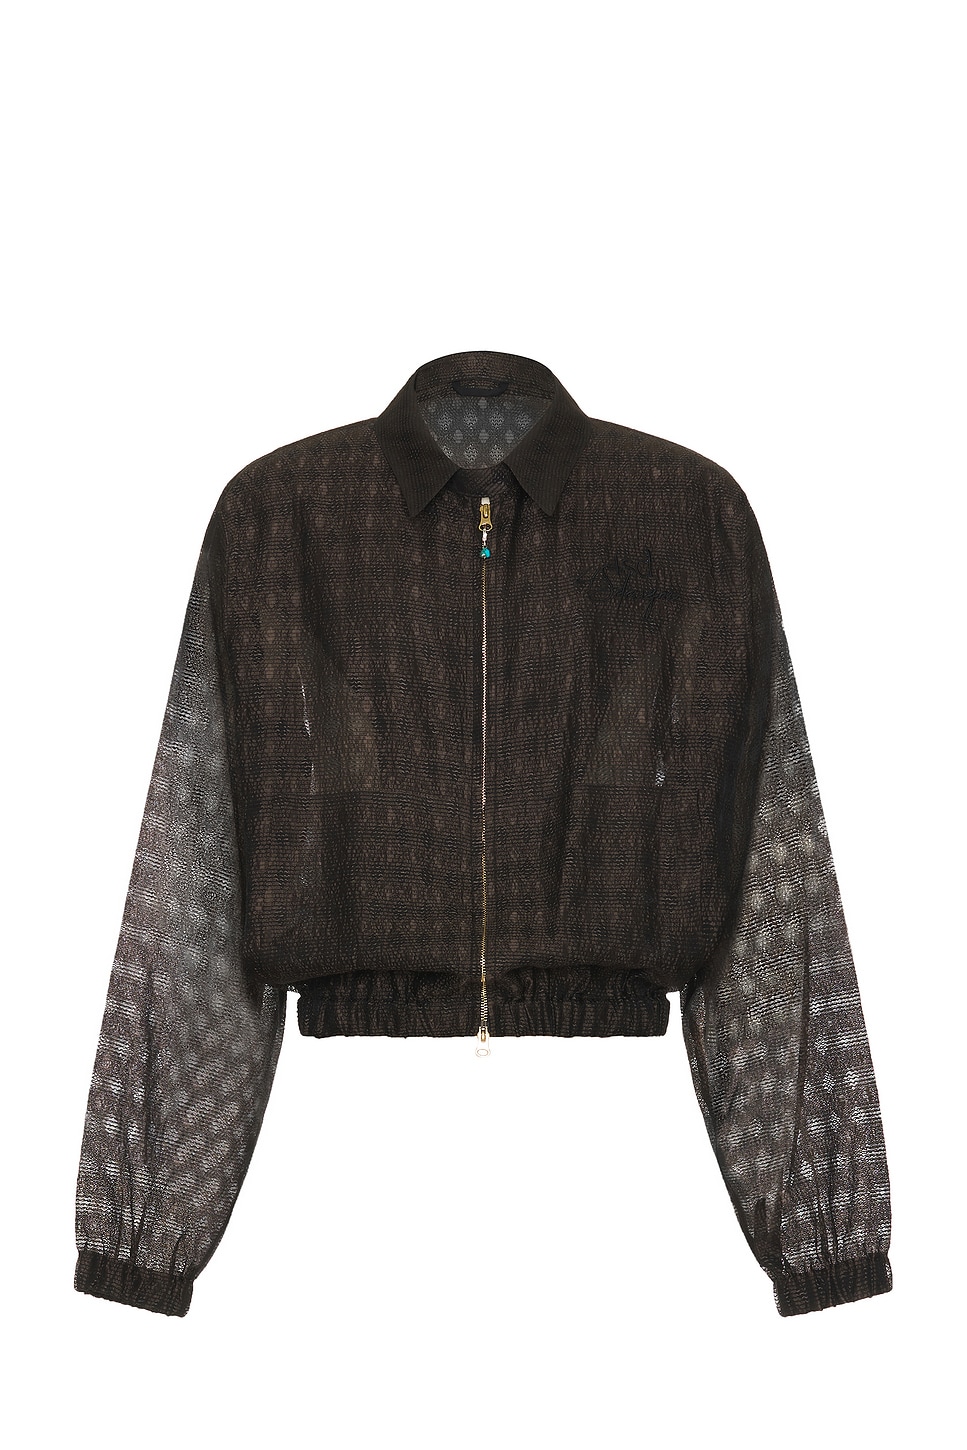 Caddy Shirt Jacket in Brown